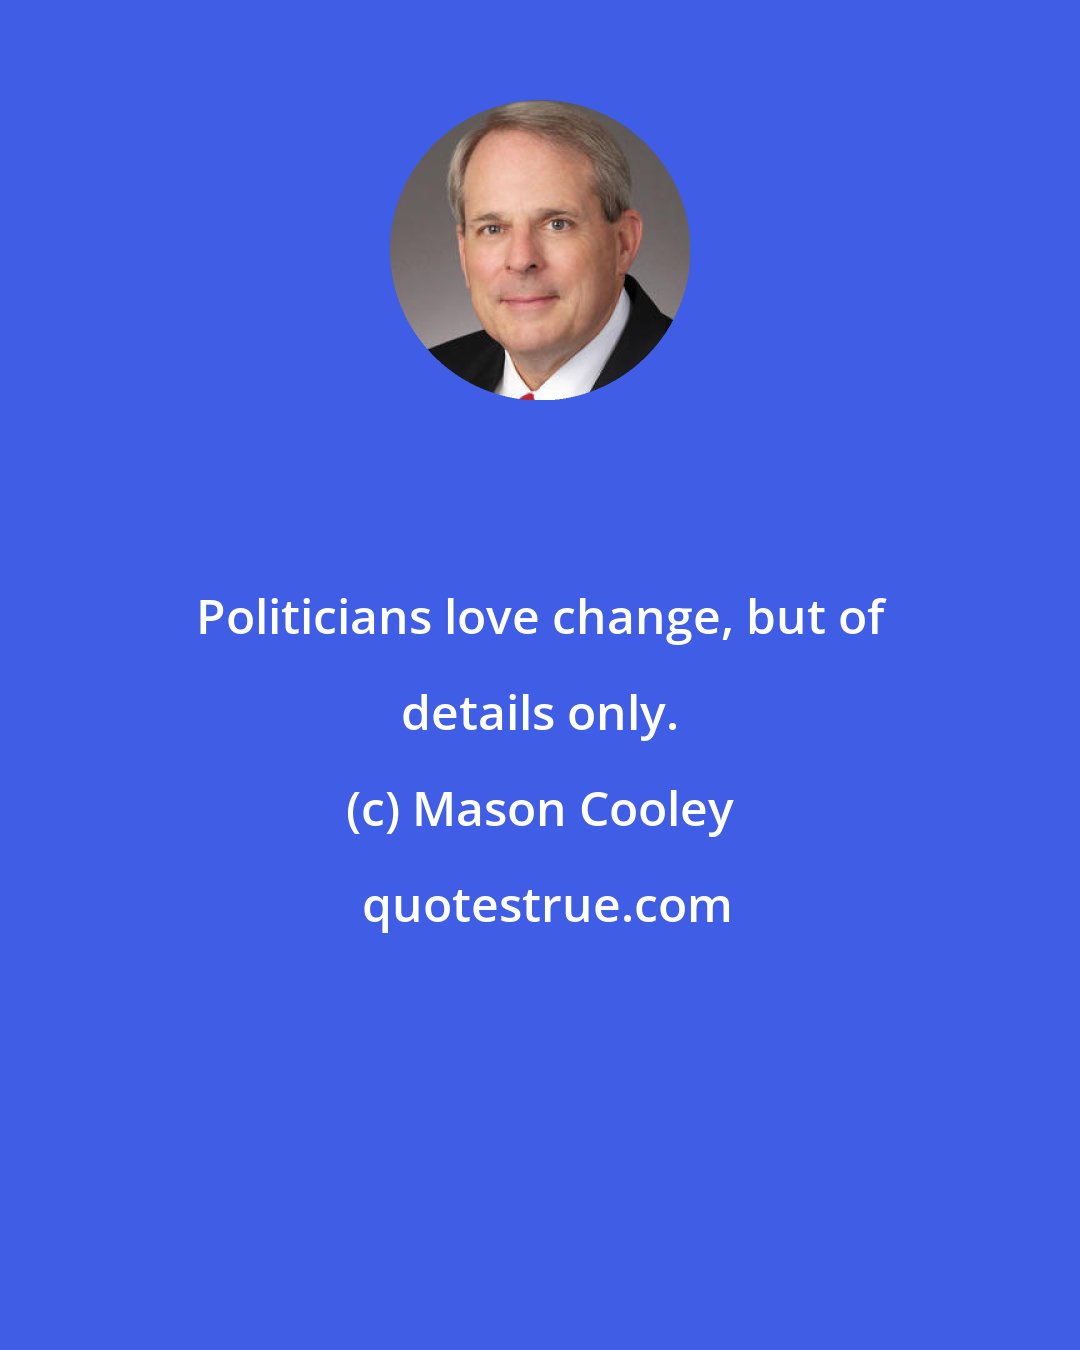 Mason Cooley: Politicians love change, but of details only.